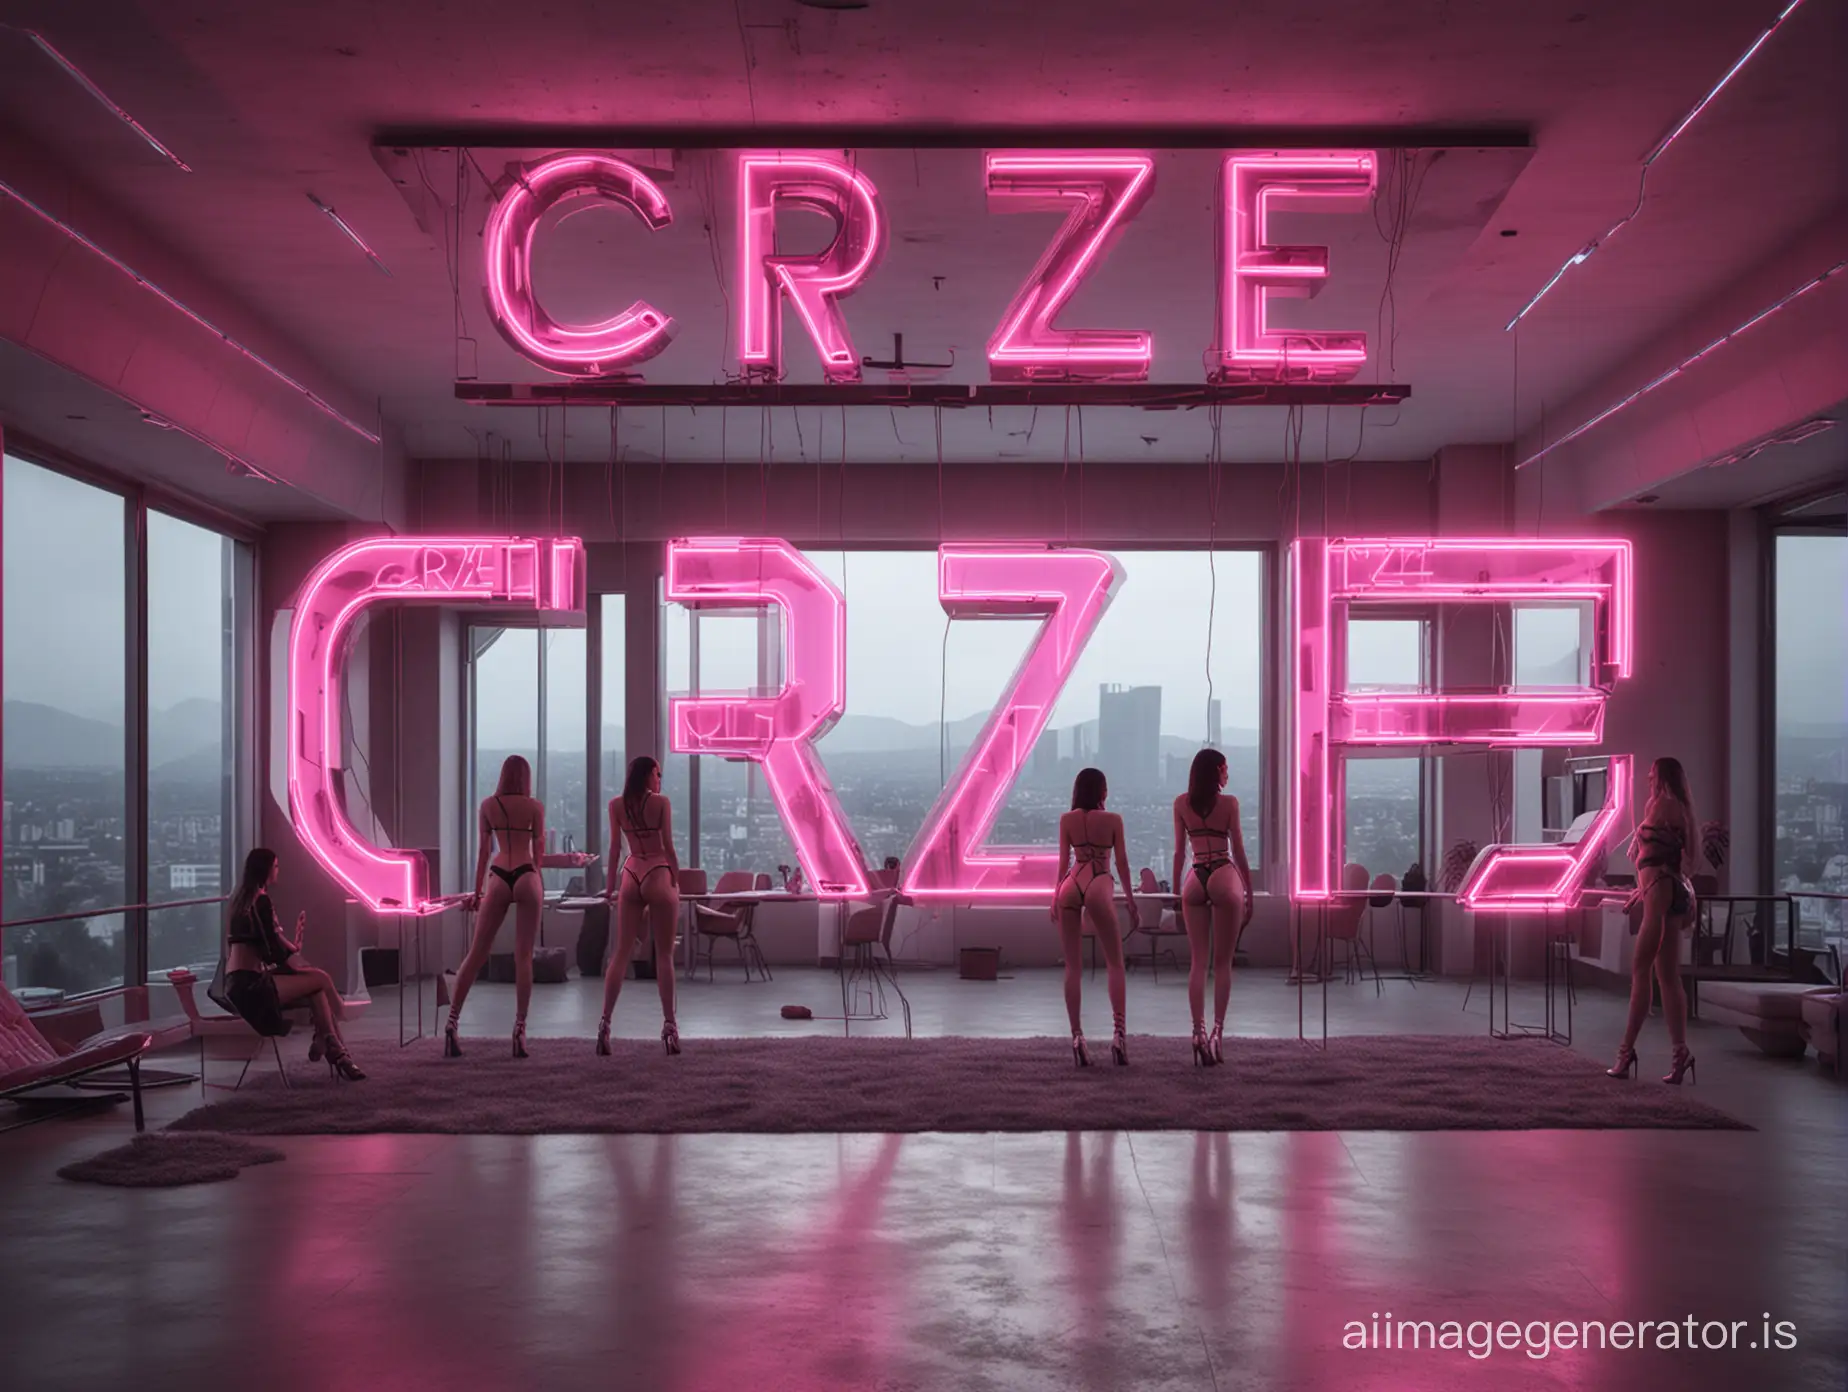 Futuristic-Ultra-Modern-Penthouse-with-Neon-CRZZE-Sign-and-Dystopian-View